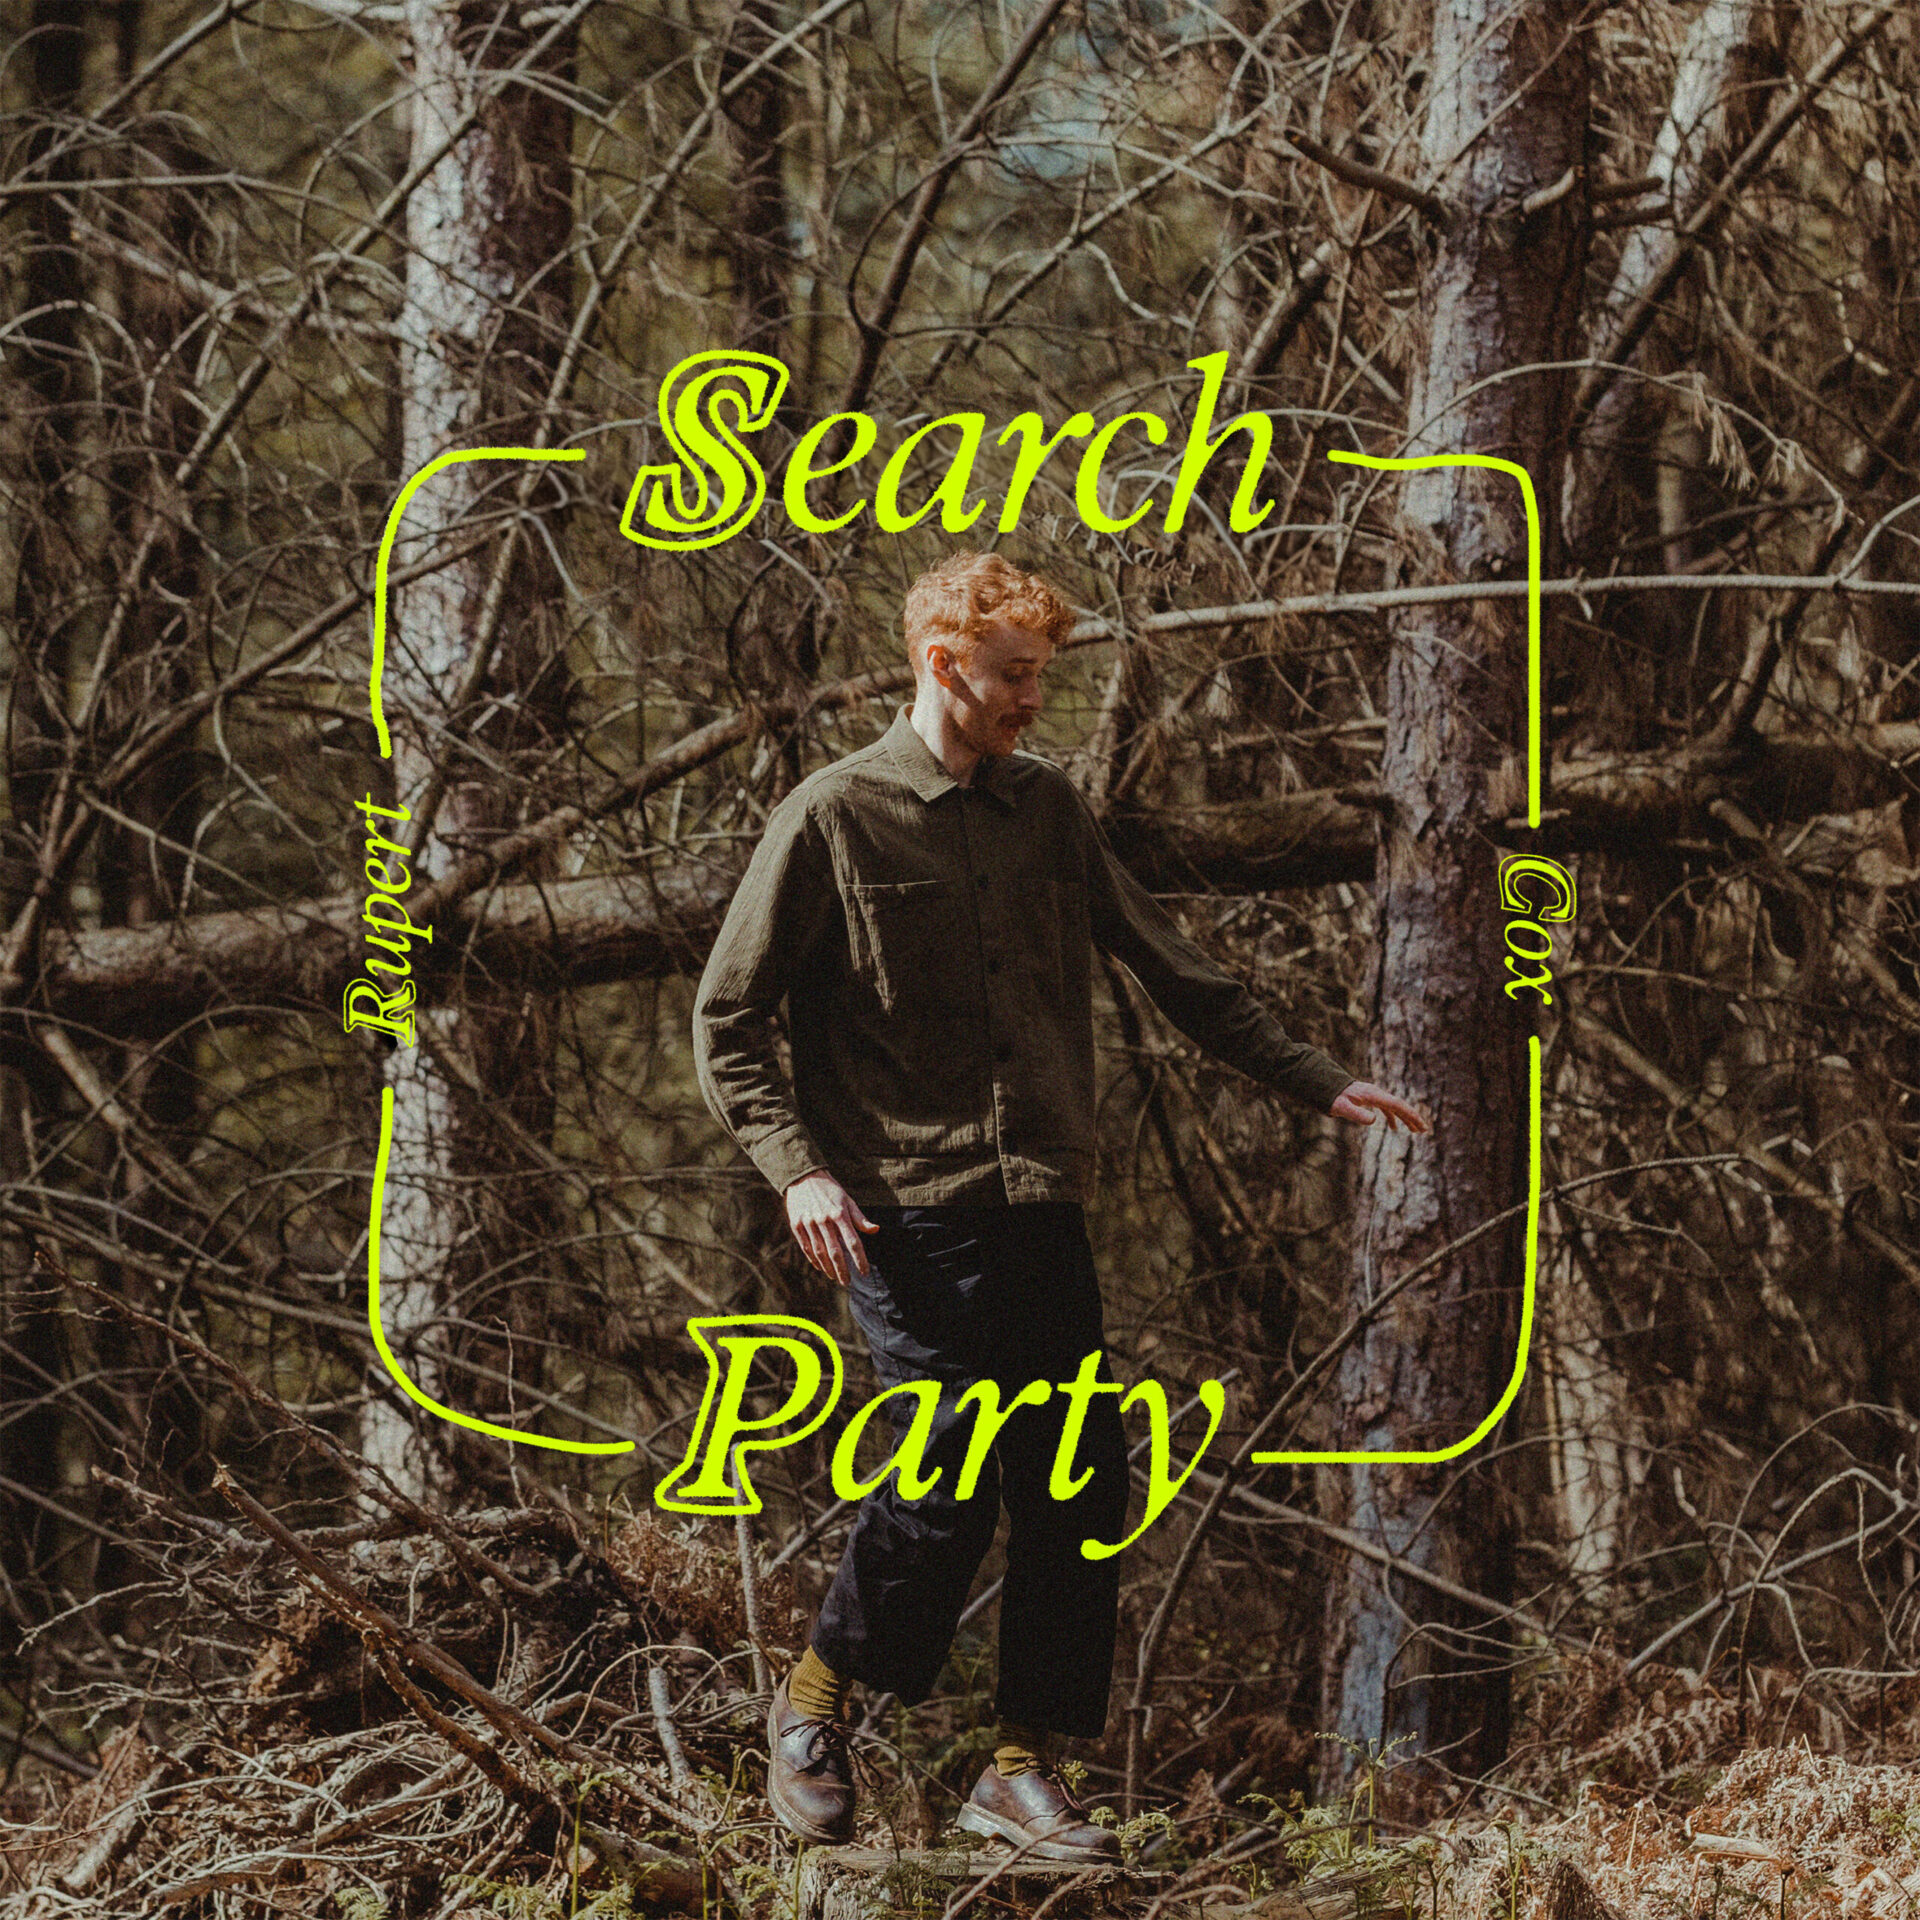 "Search Party" by Rupert Cox, an album cover